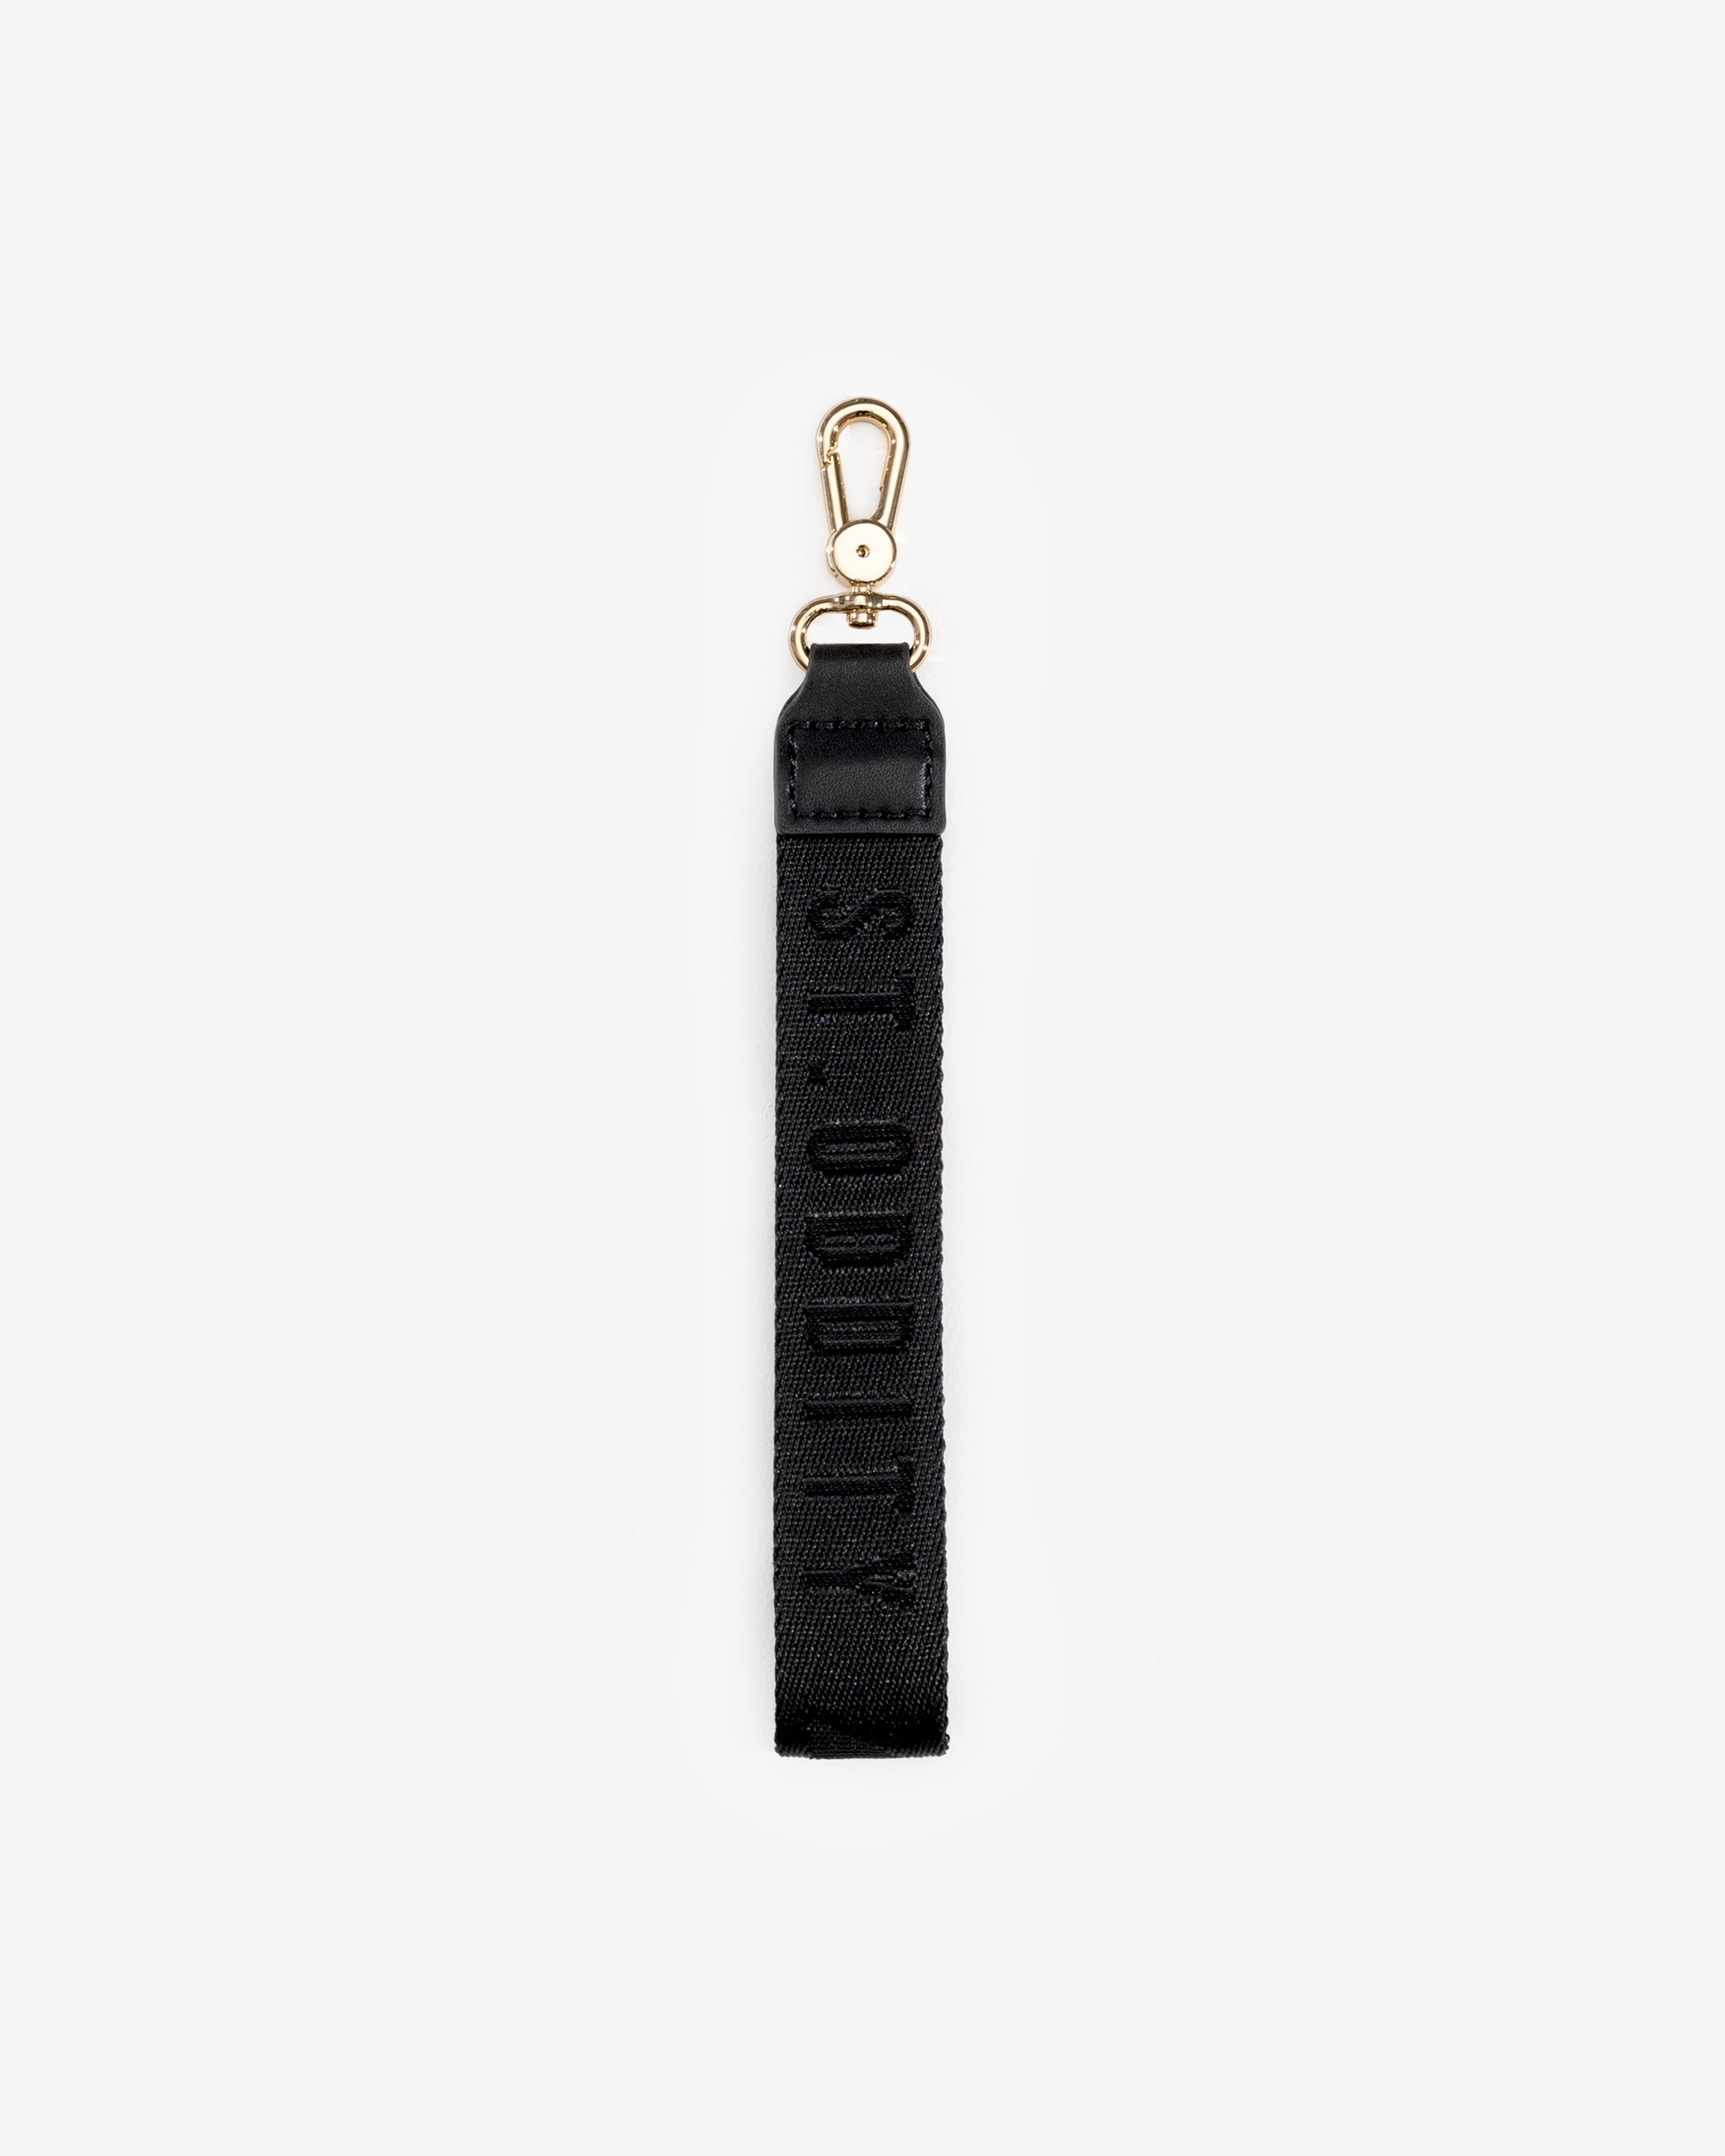 Hand Street Strap in All Black/Gold